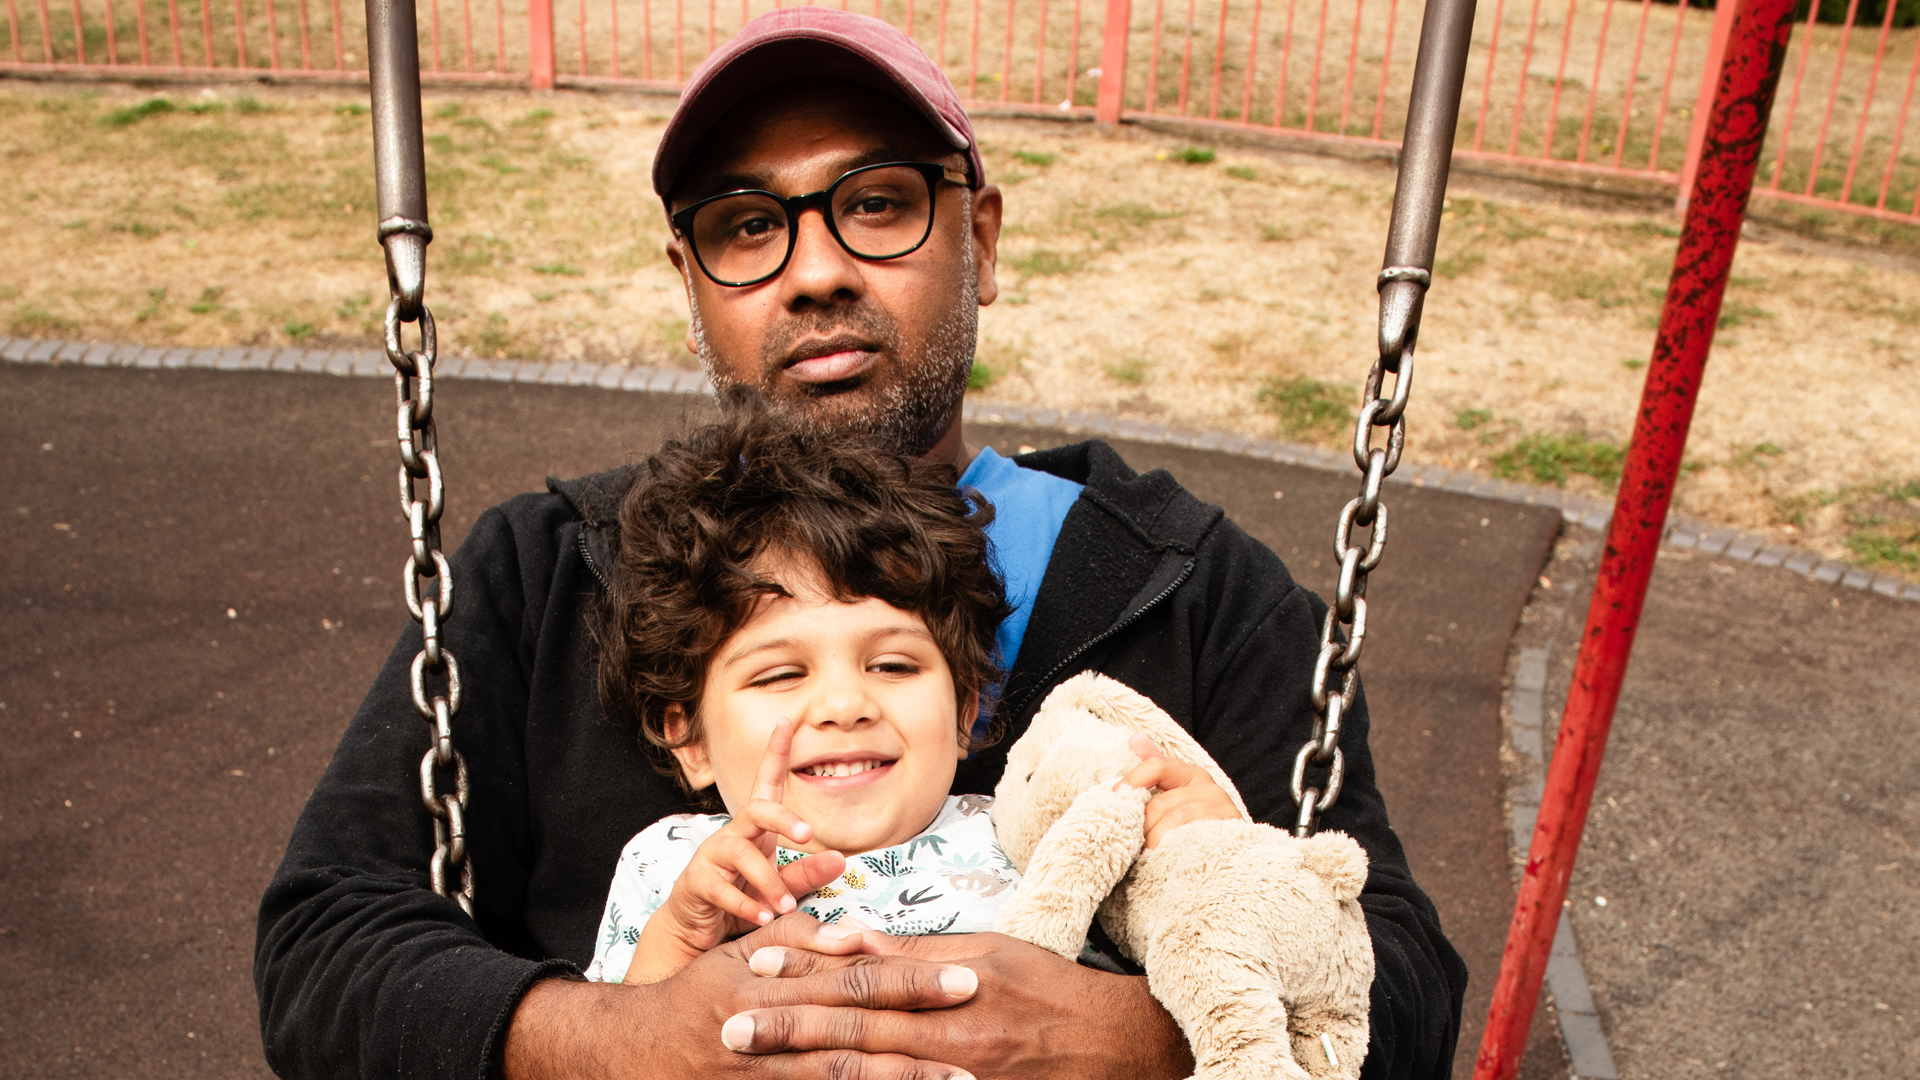 A father sits on a swing, holding their child on their lap.